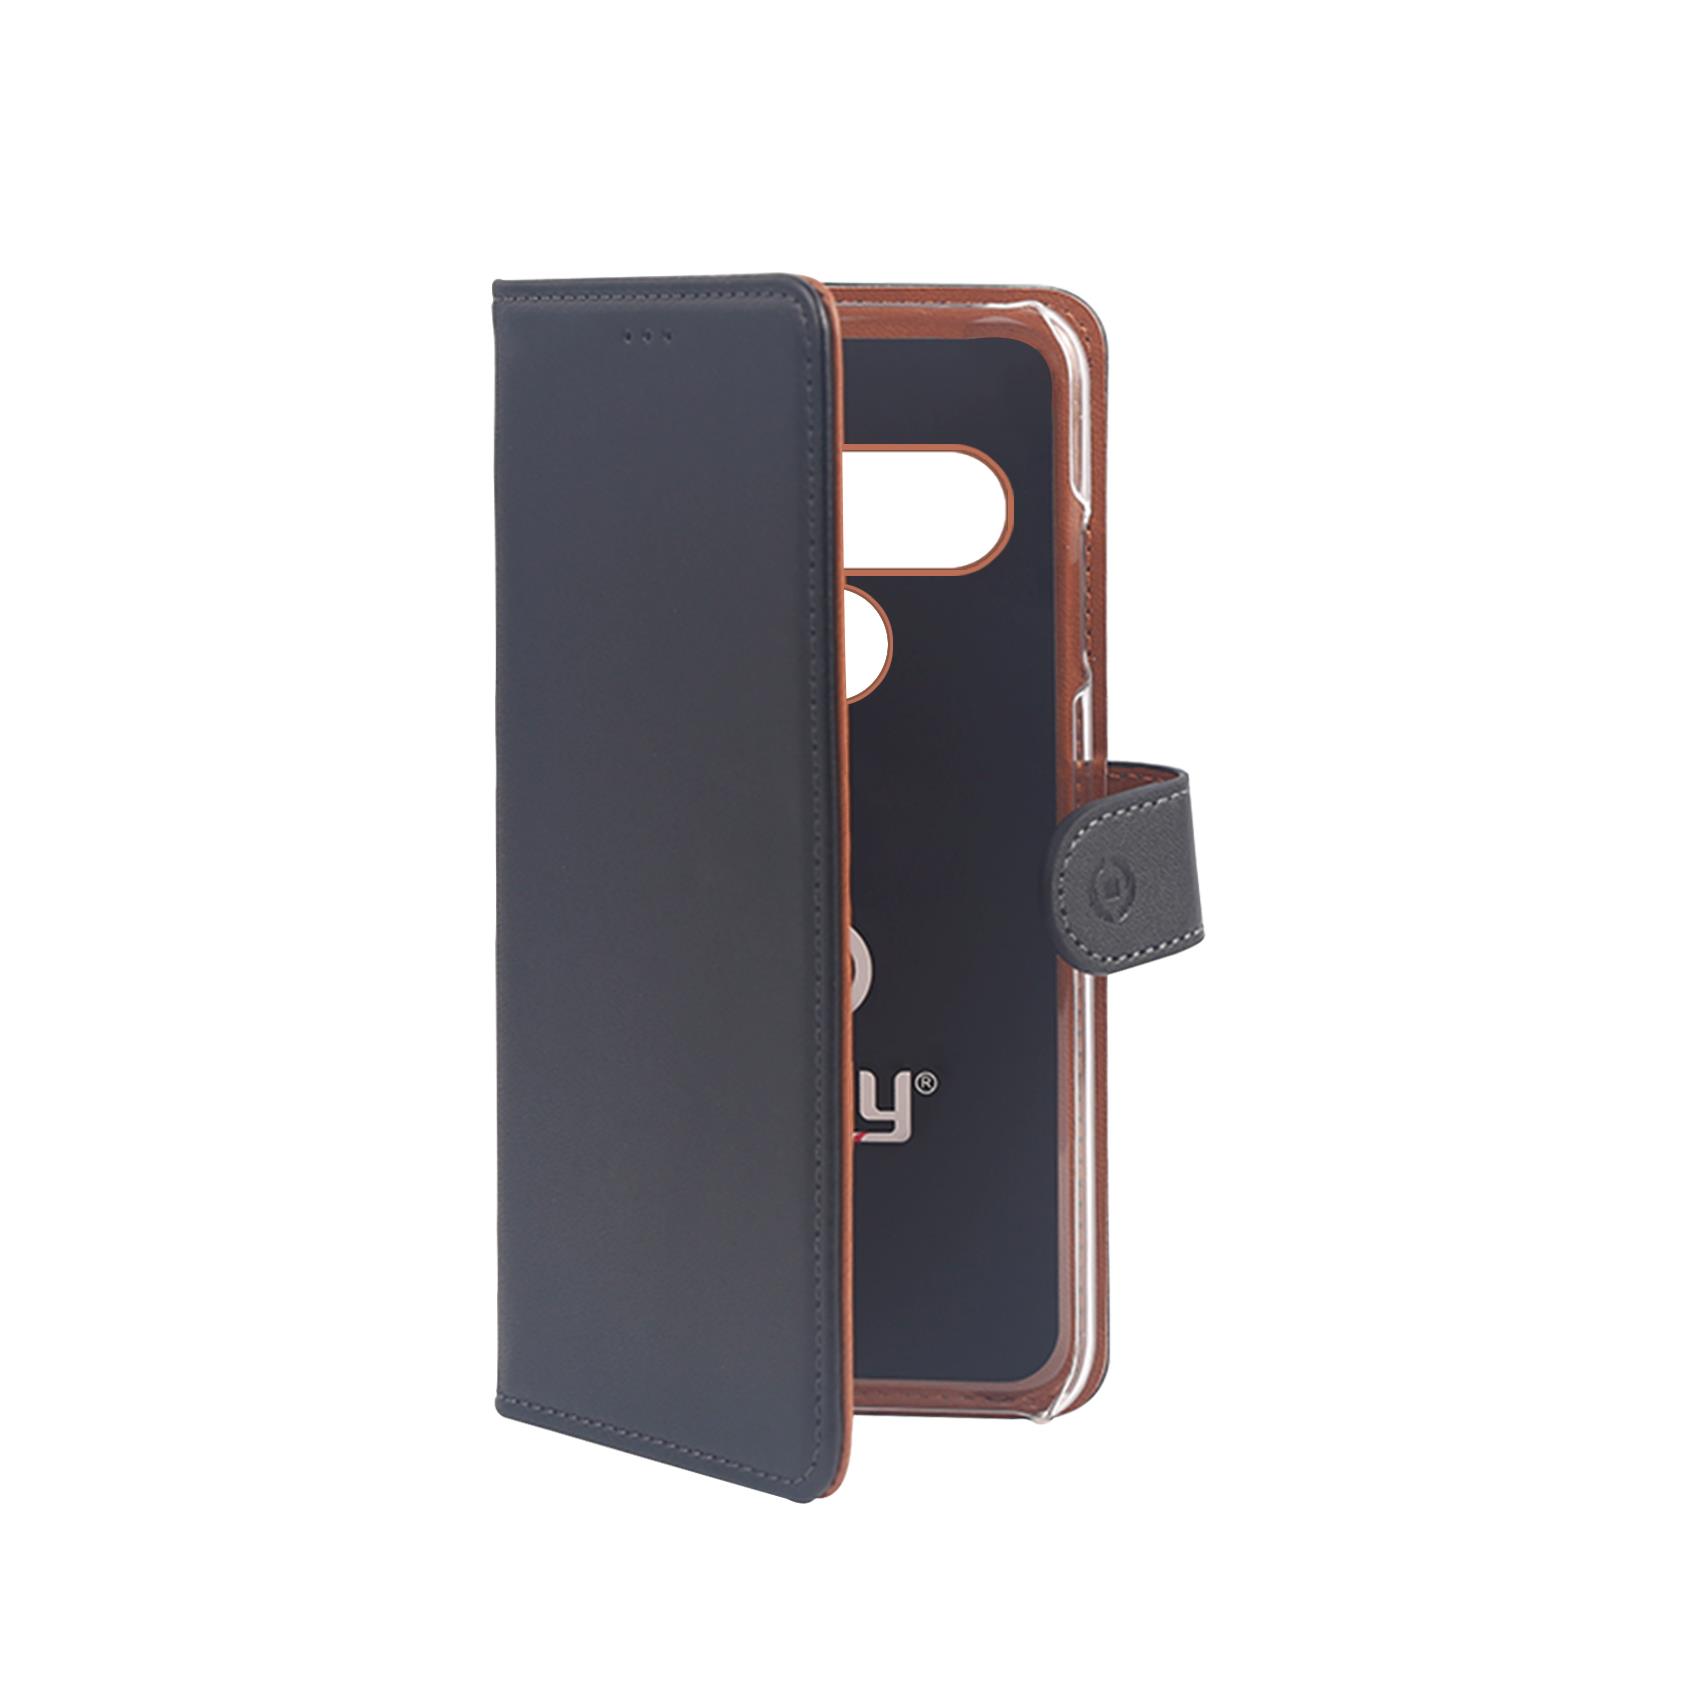 Wally Case Lg G8s Thinq Black Celly Wally853 8021735751441